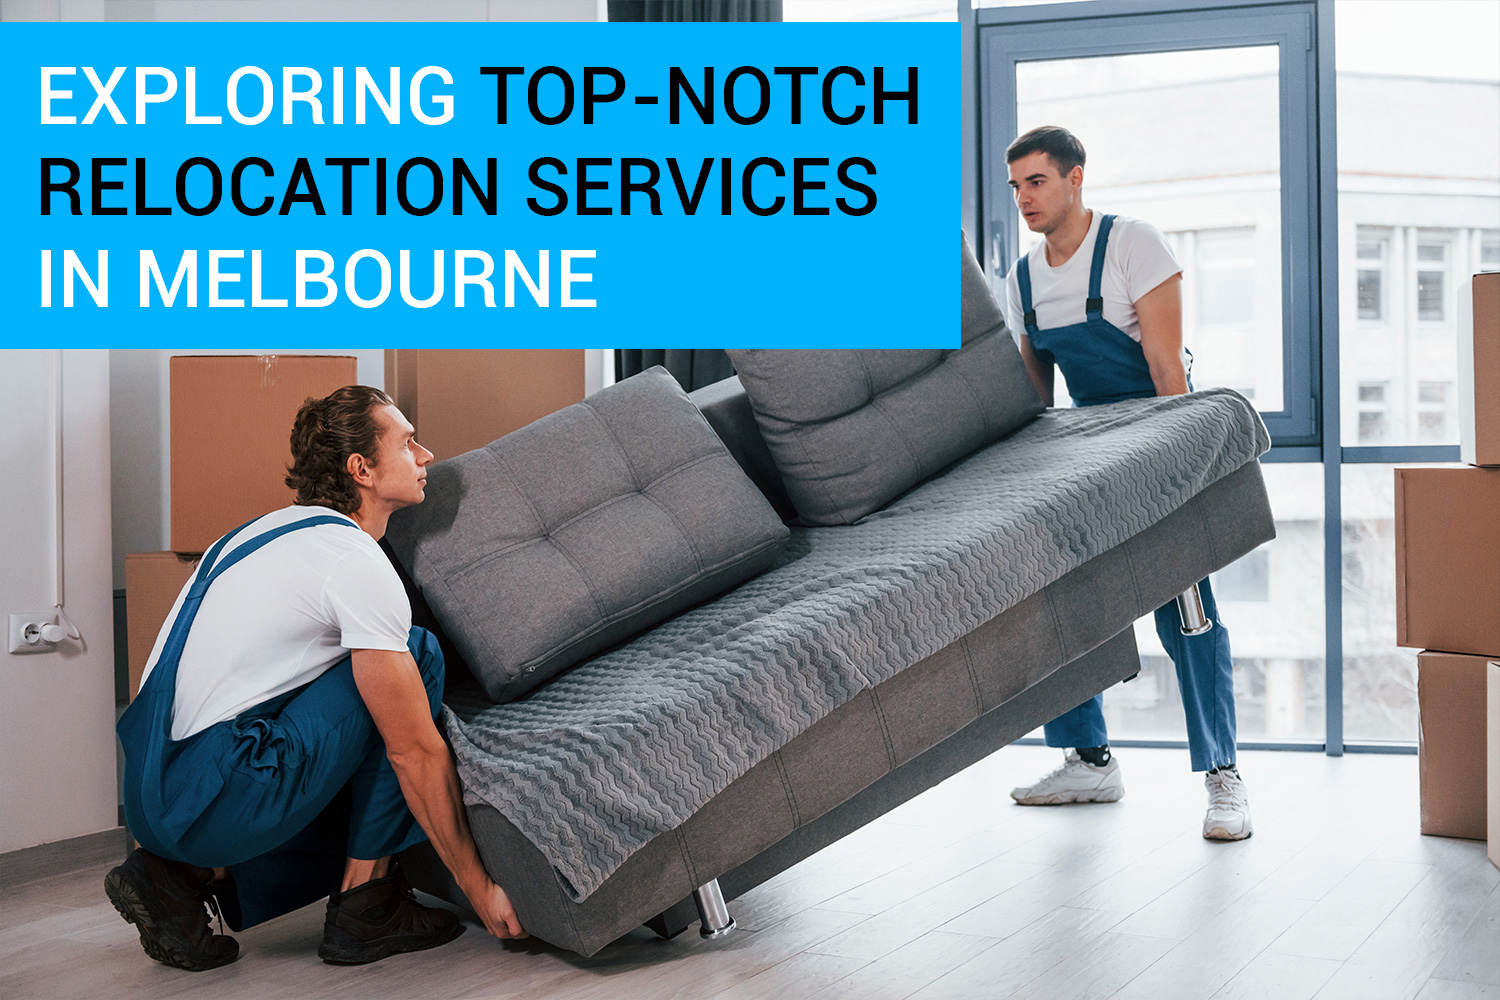 Top-Notch Relocation Services in Melbourne